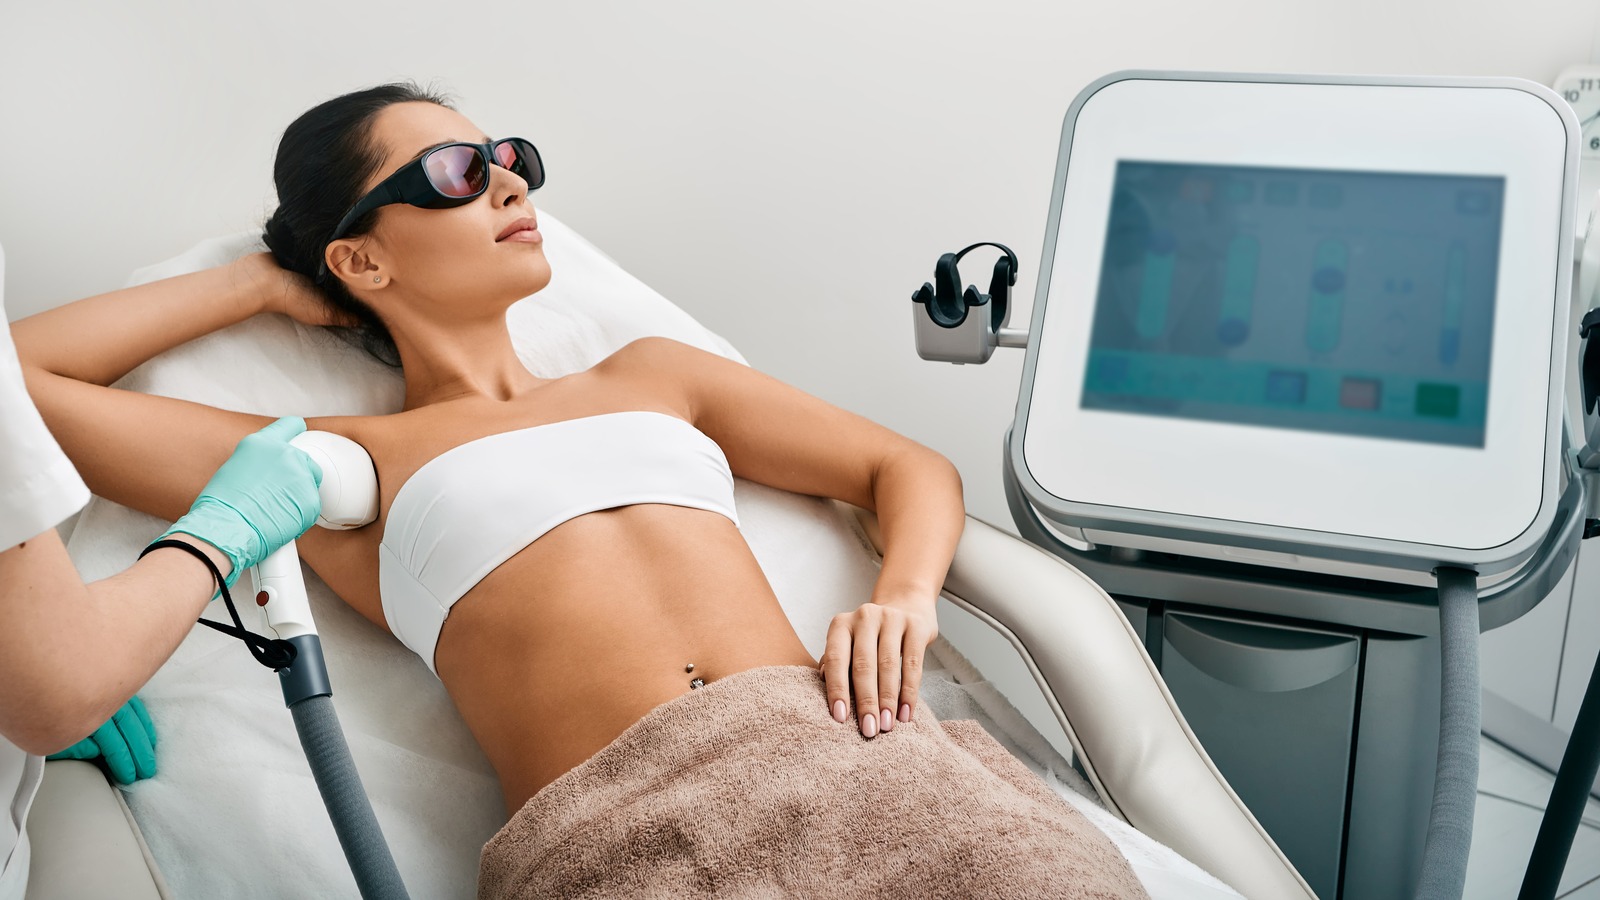 Laser Hair Removal Facts Every Woman Should Know